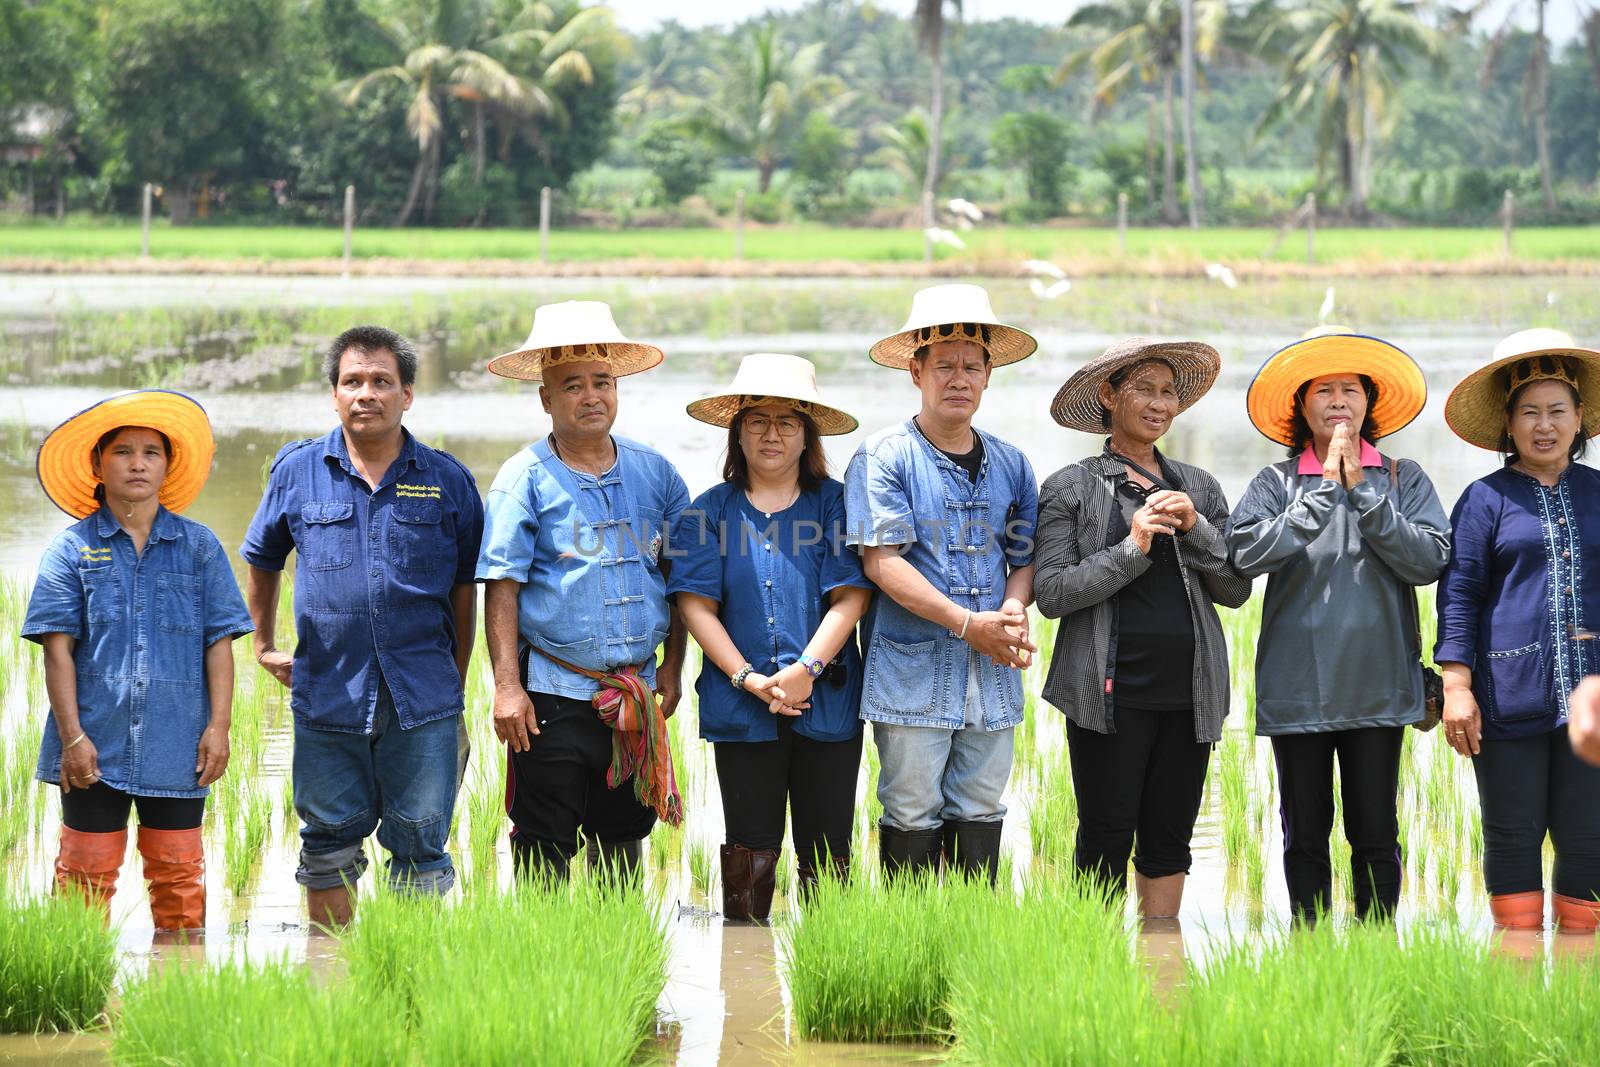 Farmers planting rice by demonstrating sufficient economy  by chatchai